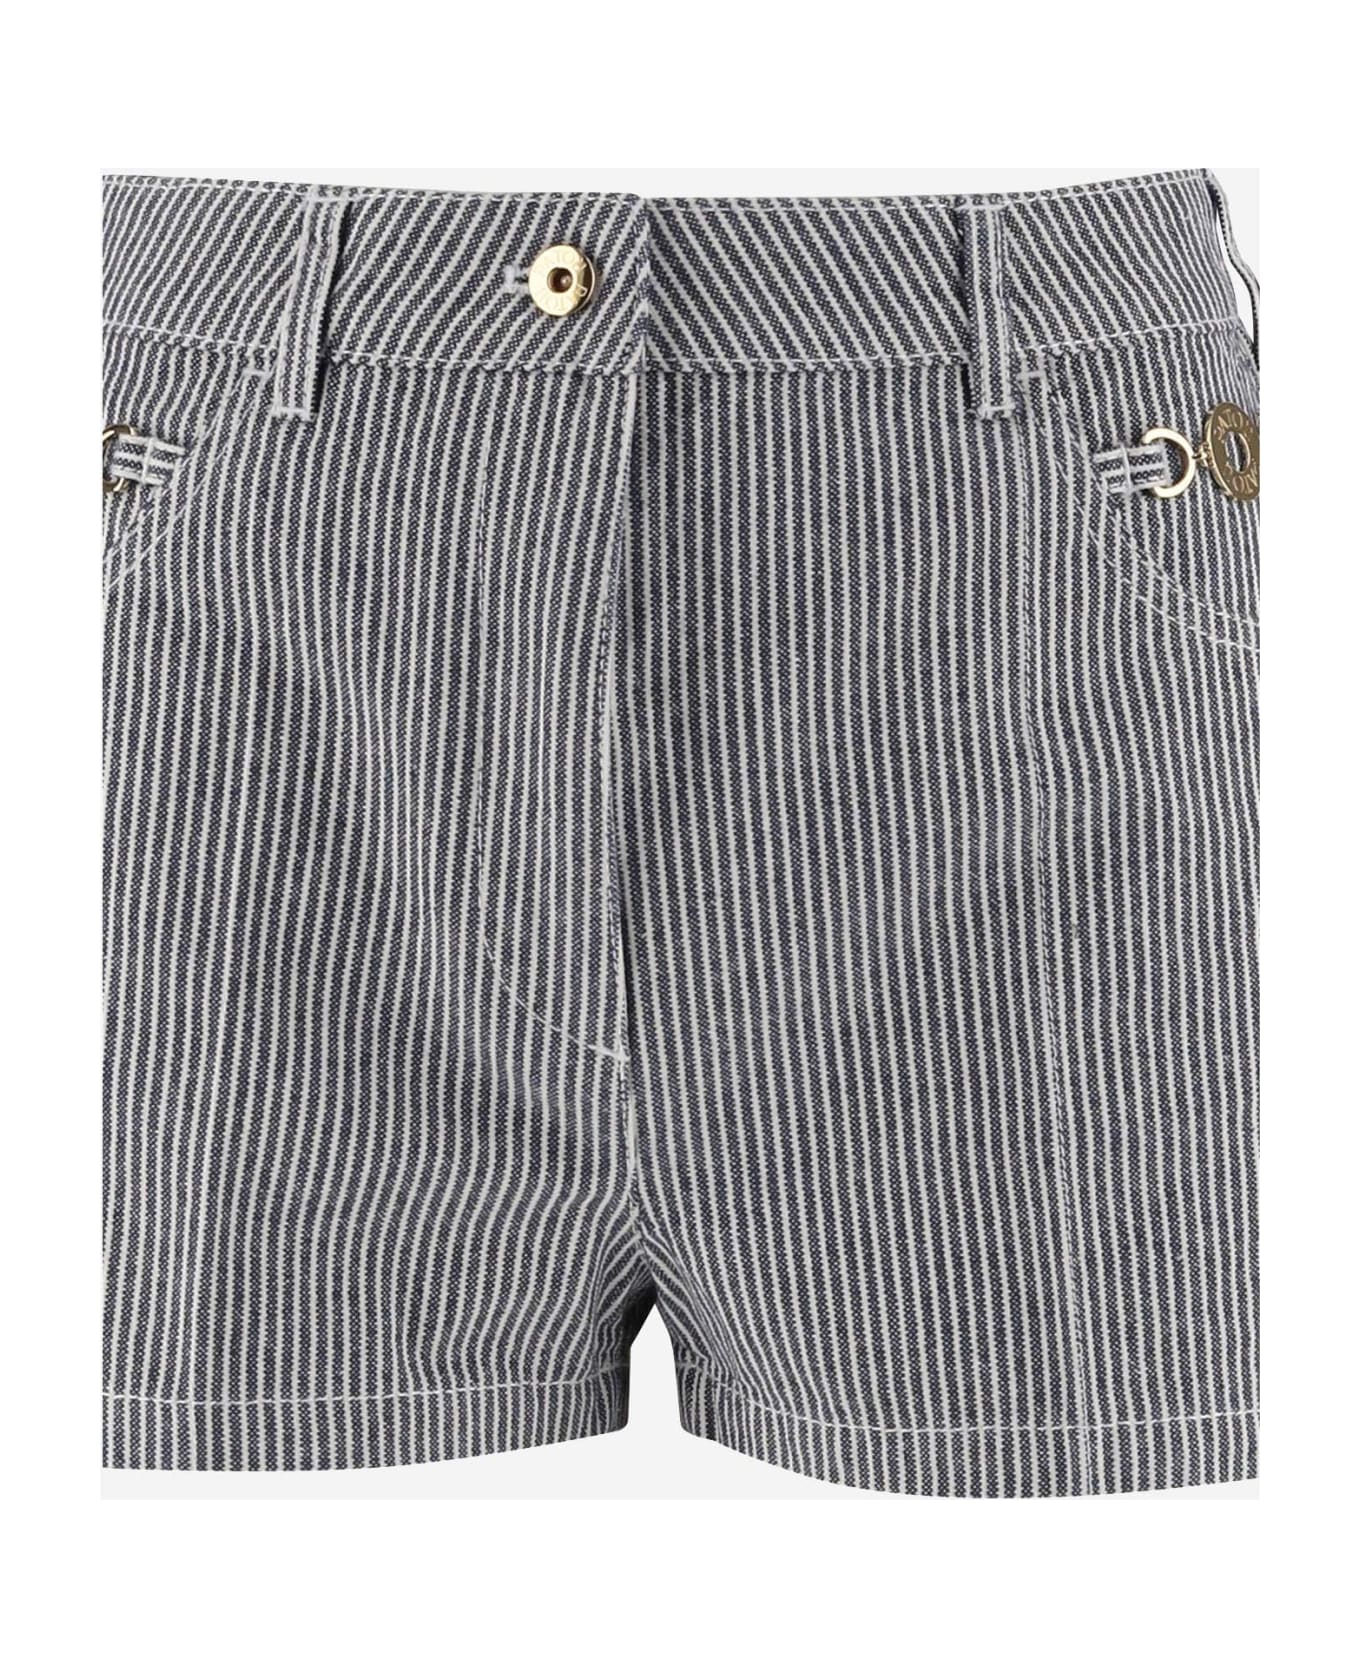 Patou Cotton Short Trousers With Striped Pattern - Navy Striped ショートパンツ